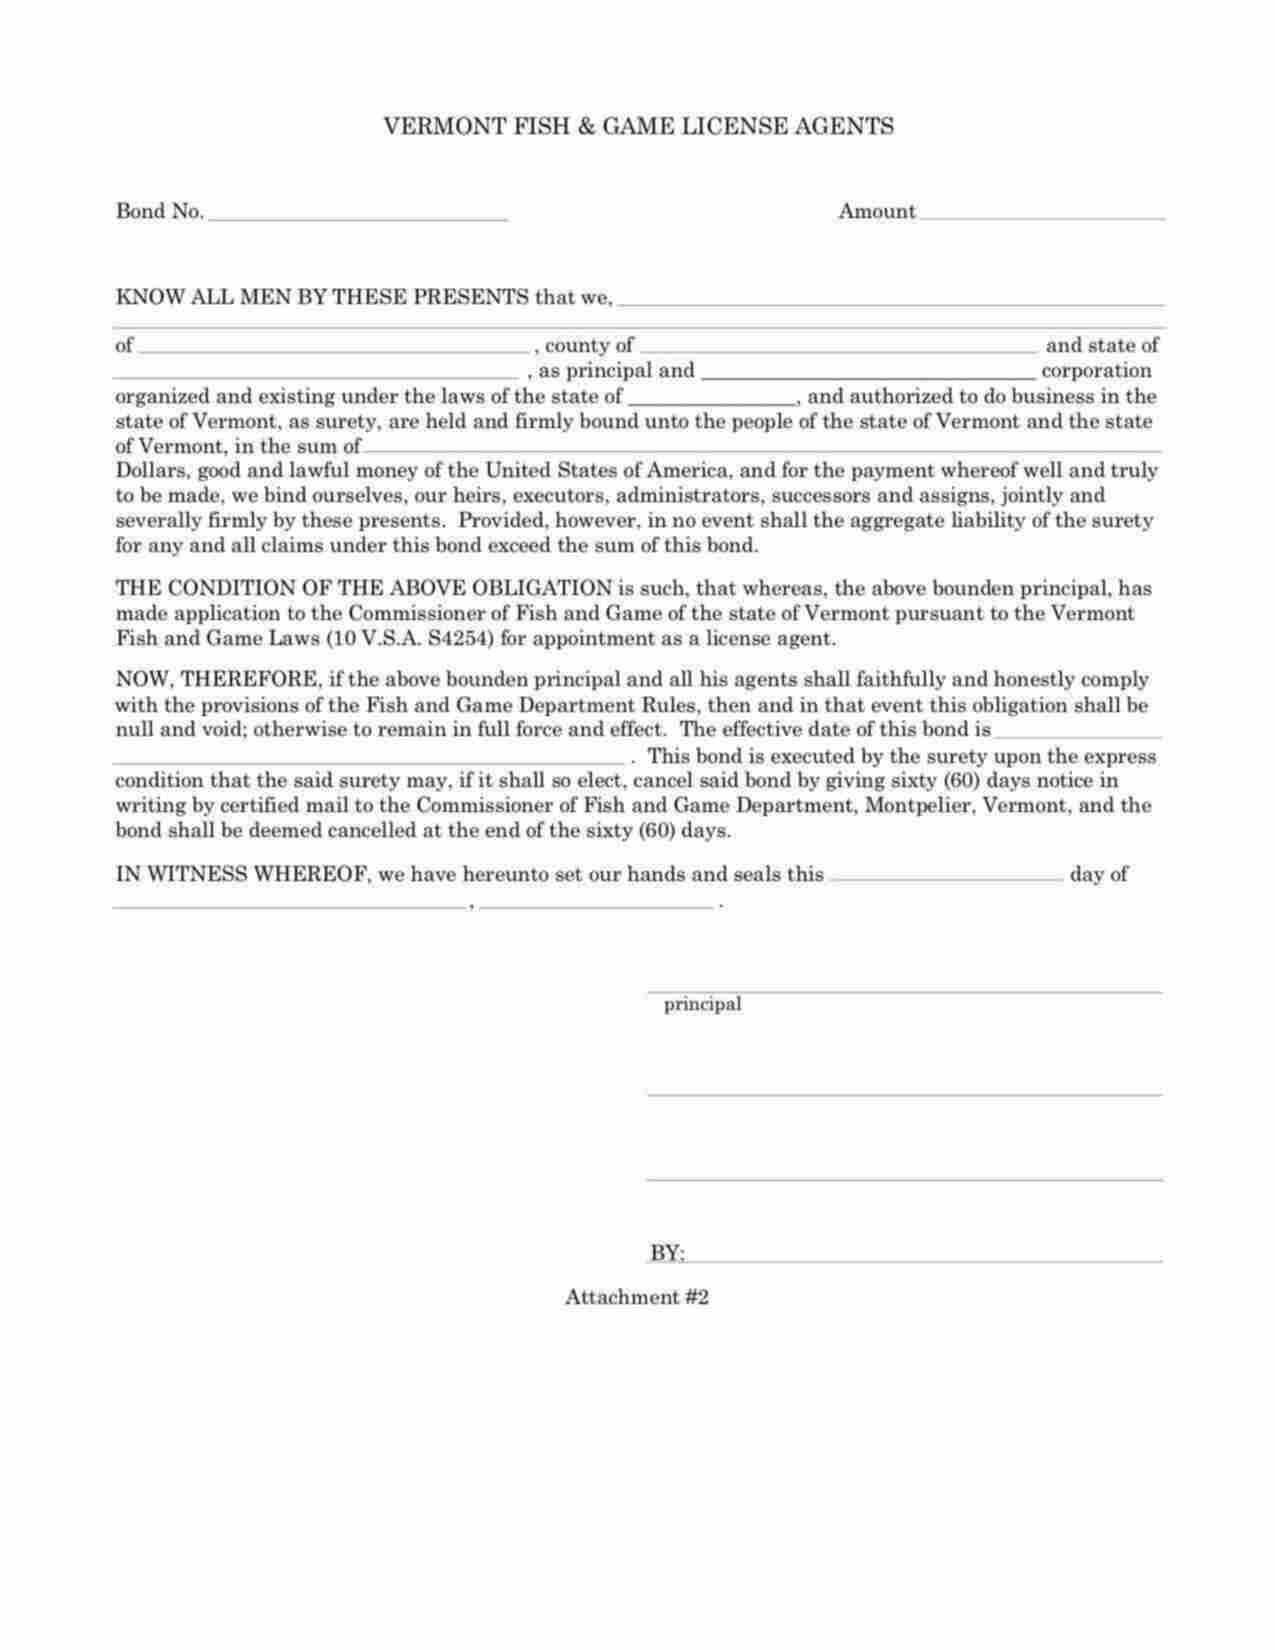 Vermont Fish and Game License Agents Bond Form